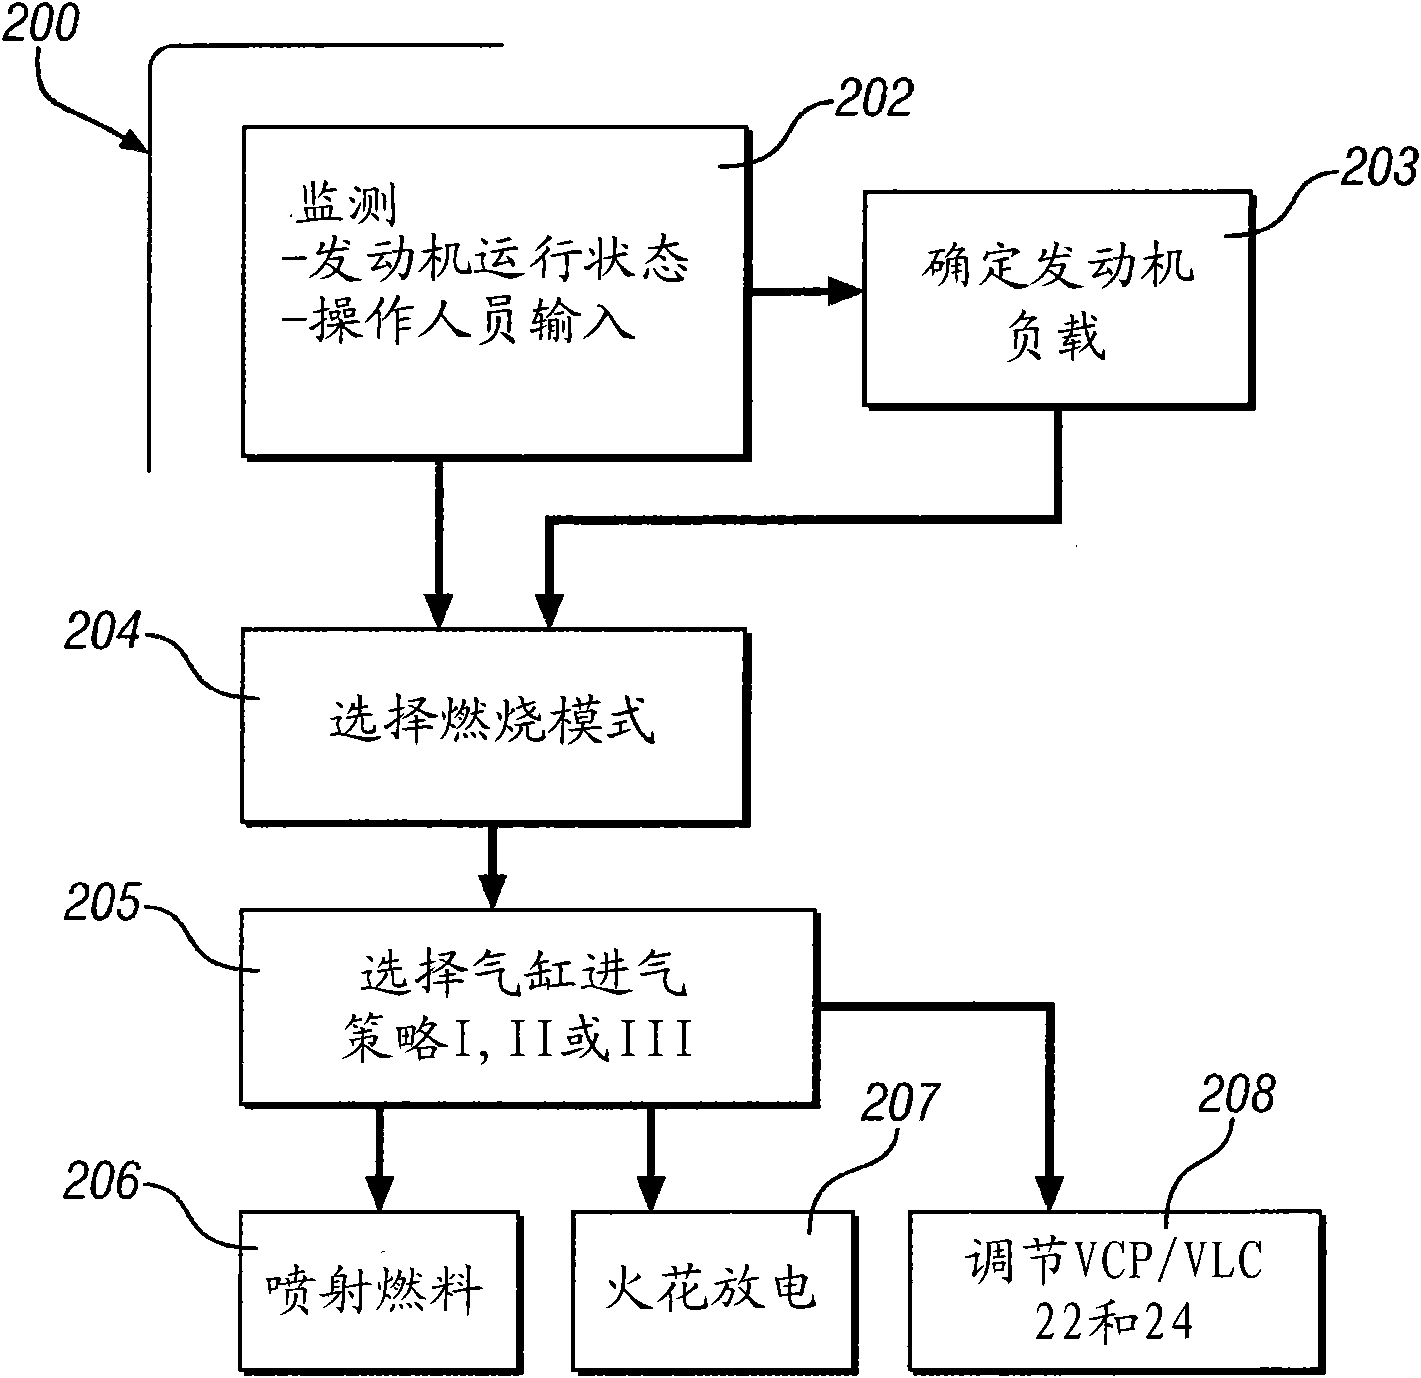 Method for controlling a spark-ignition direct-injection internal combustion engine at low loads